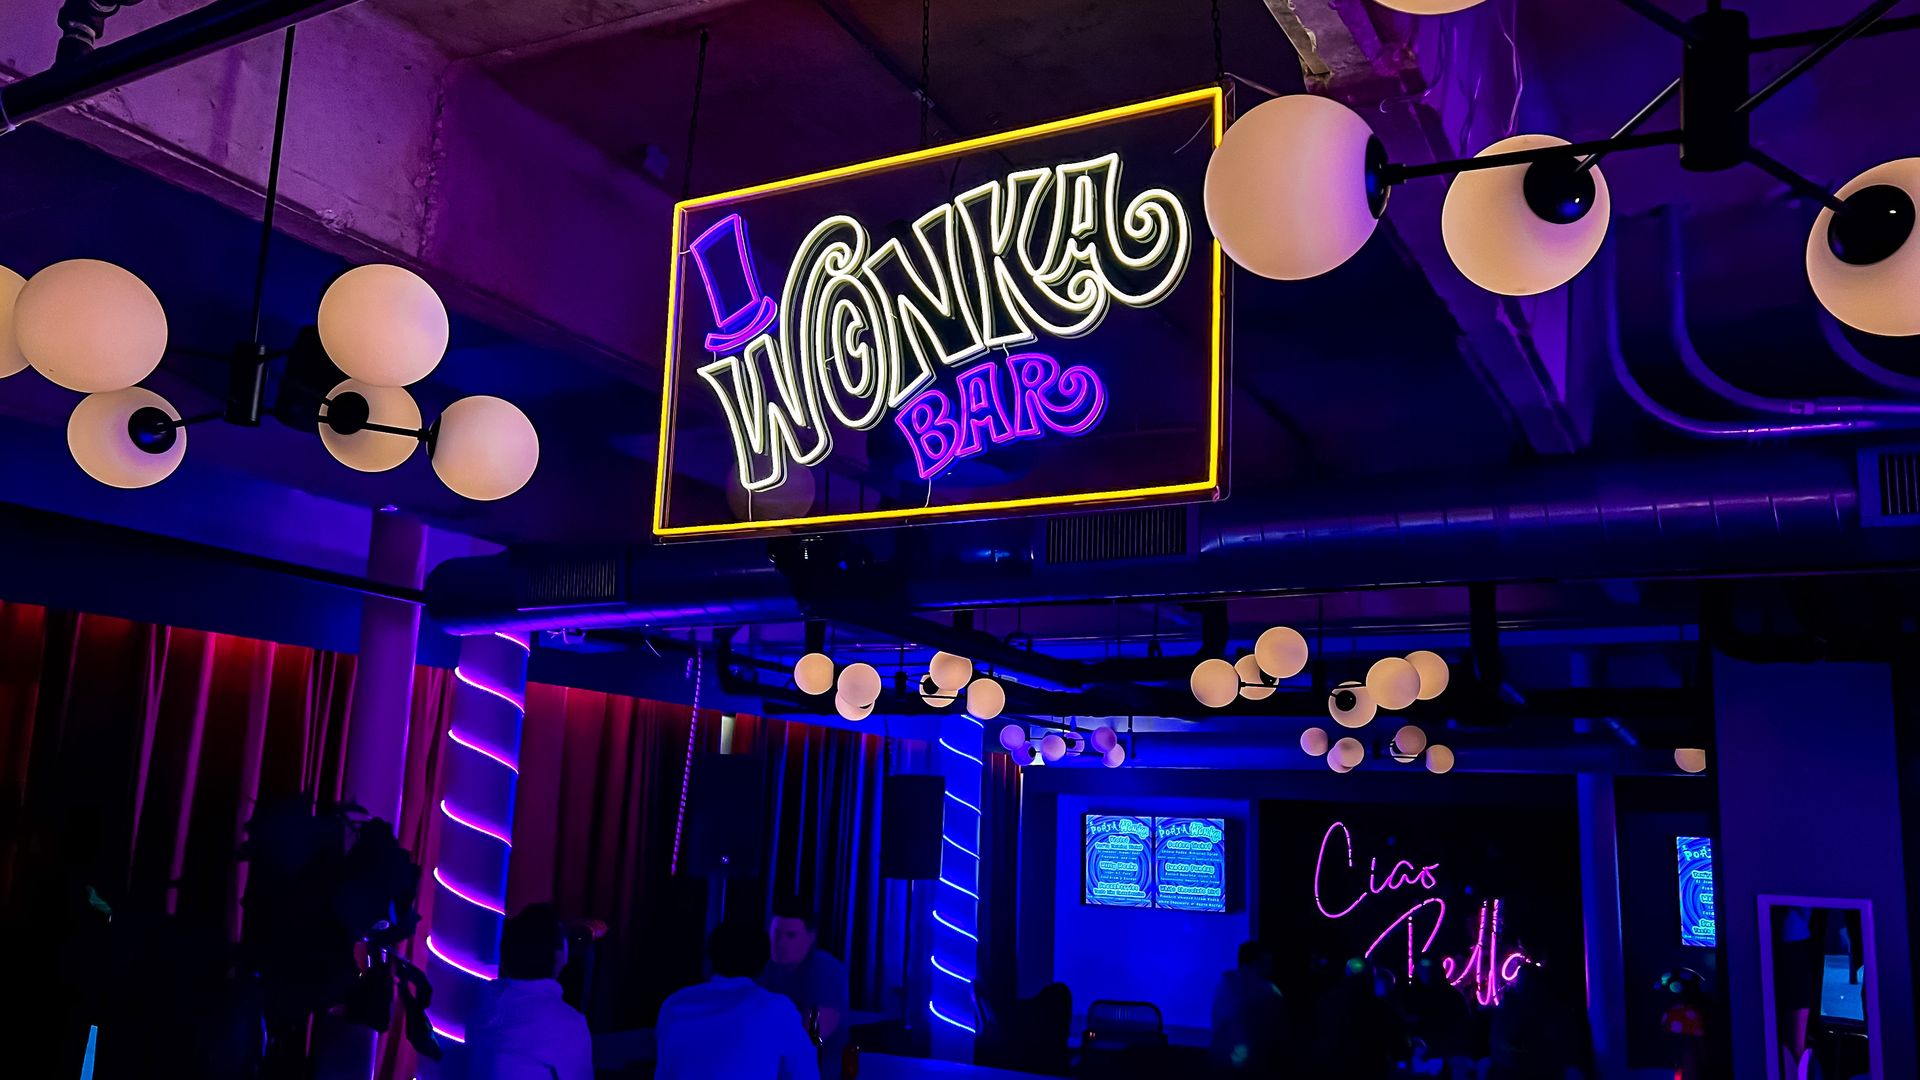 A dim room with illuminated by bulbous pendant lighting and a neon sign that says "Wonka Bar."